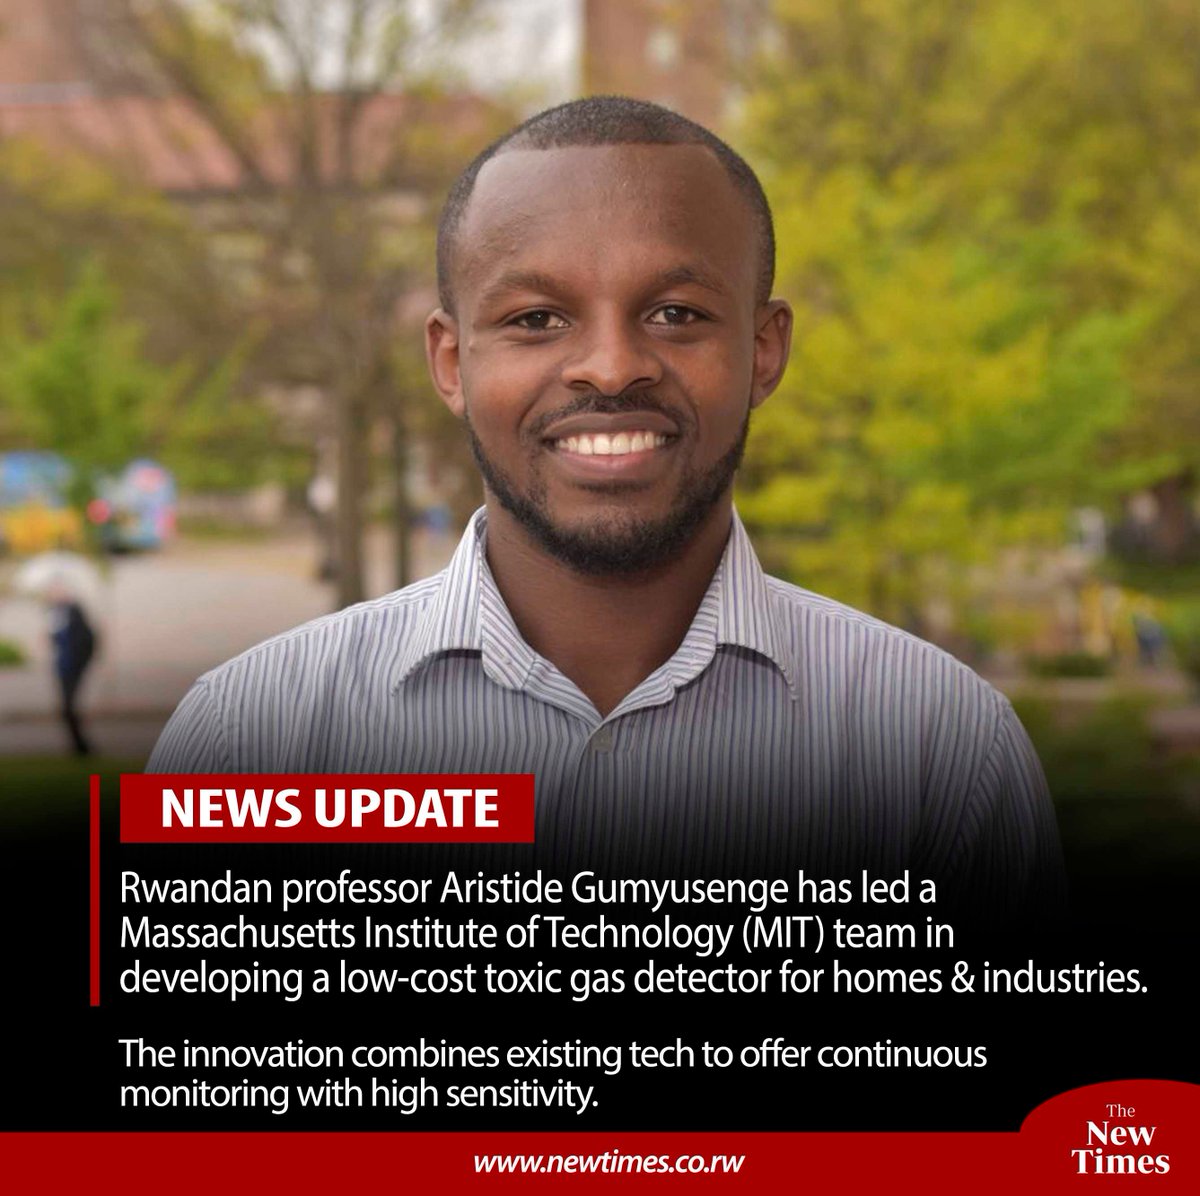 #Rwanda-n scientist Aristide Gumyusenge spearheaded a team of Massachusetts Institute of Technology (MIT) researchers to develop high-tech toxic gas detectors. READ: buff.ly/3WTdce7